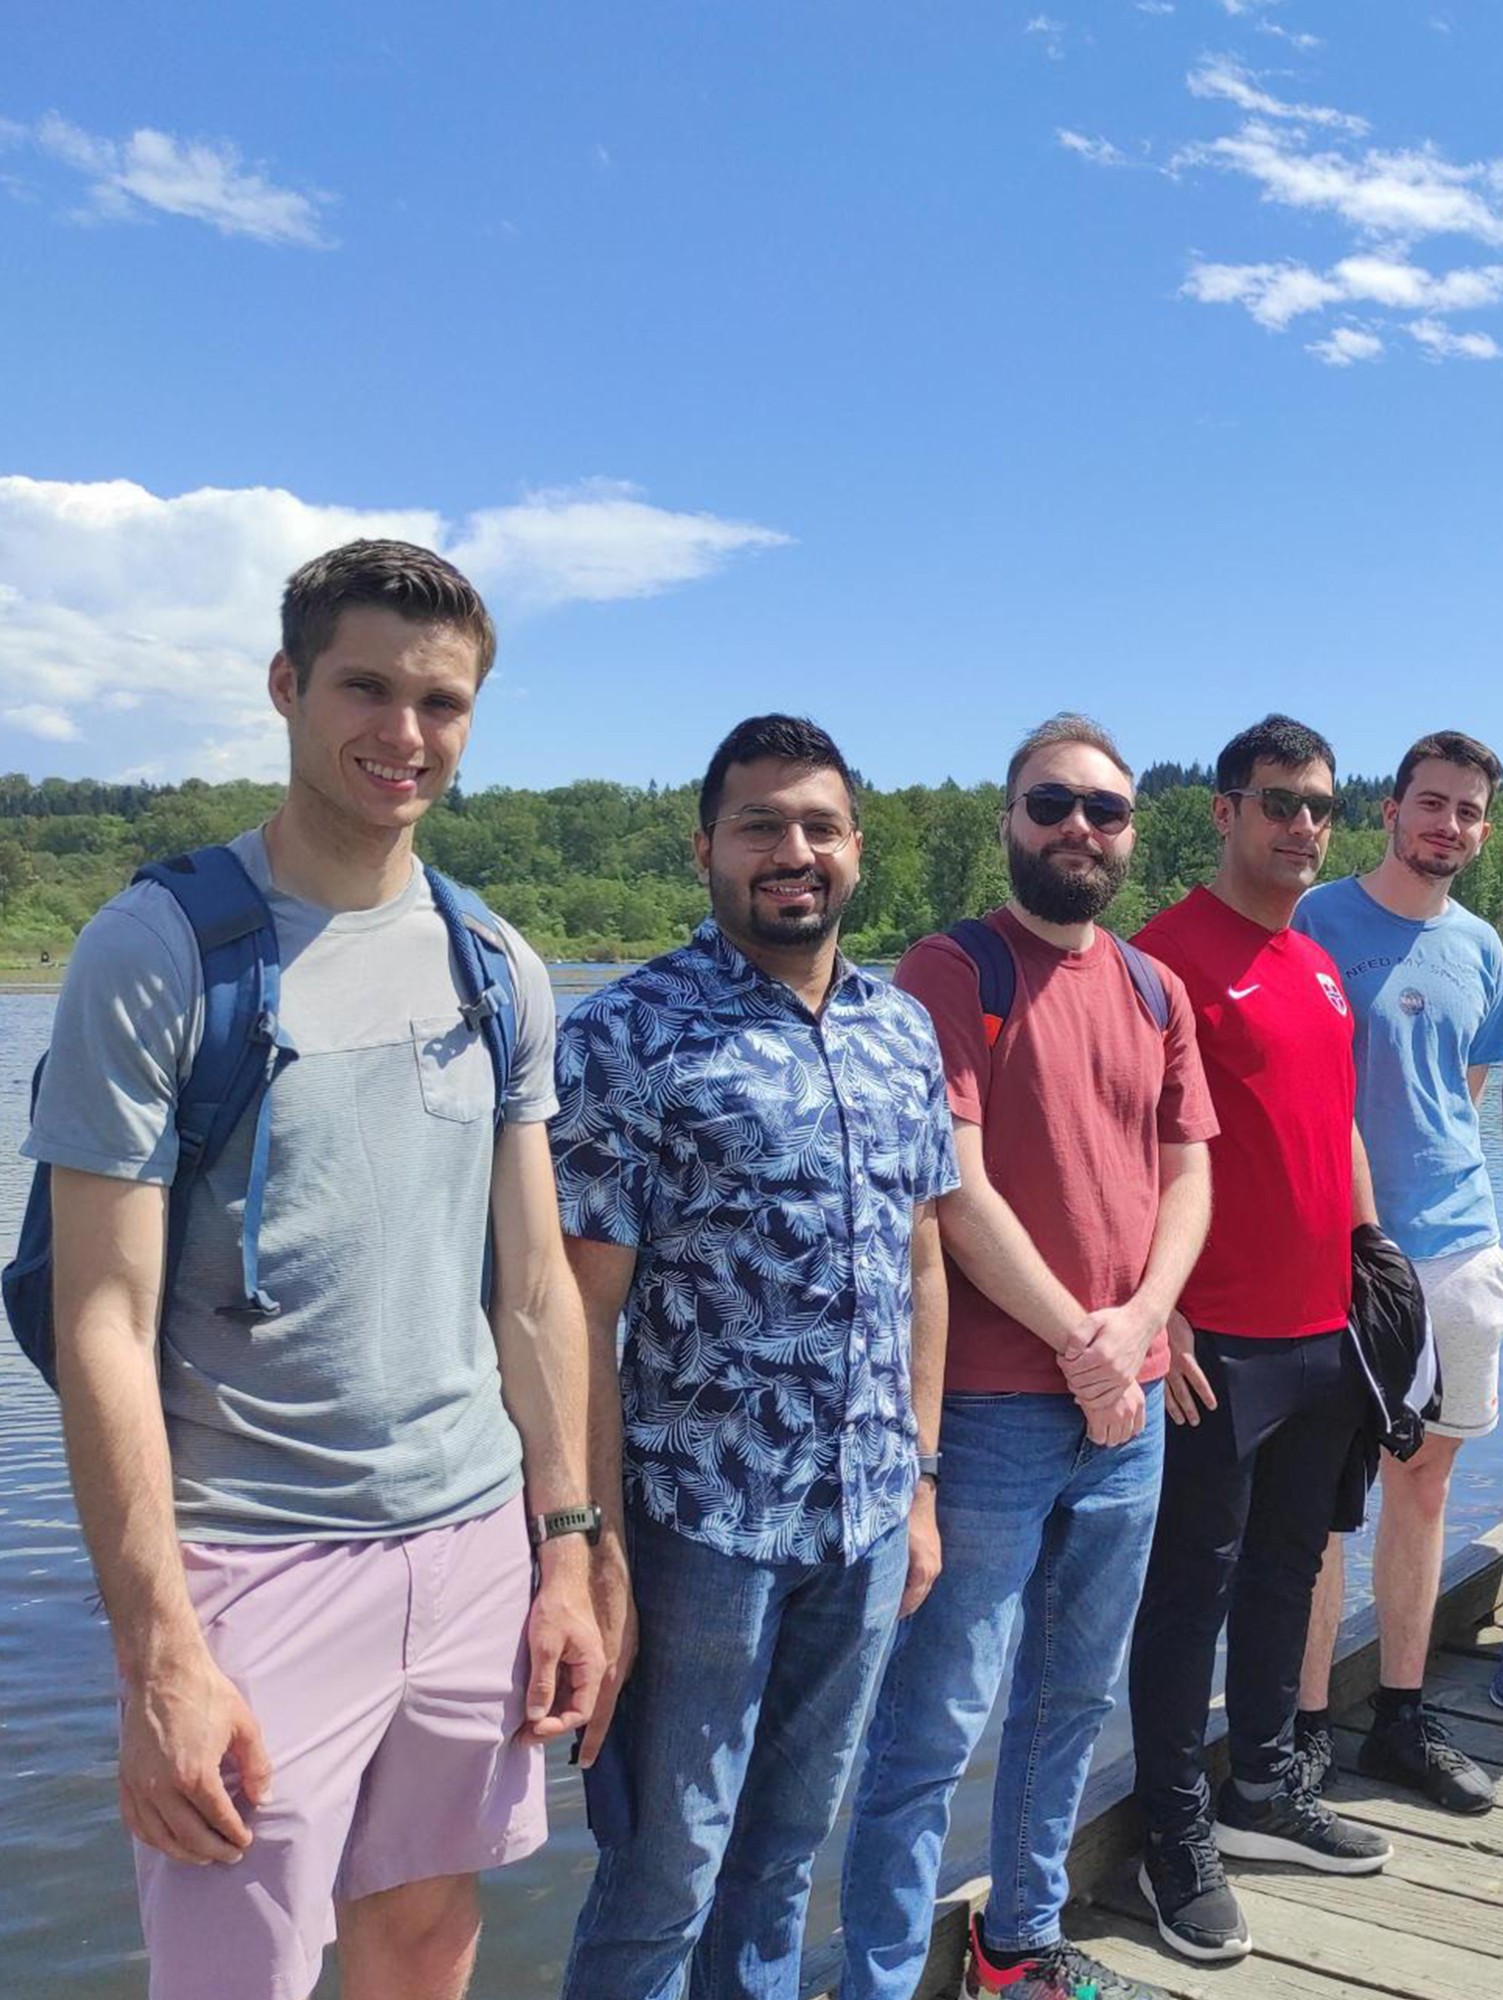 Graduate students from Hamilton Hall hanging out on the dock near a lake on a sunny day